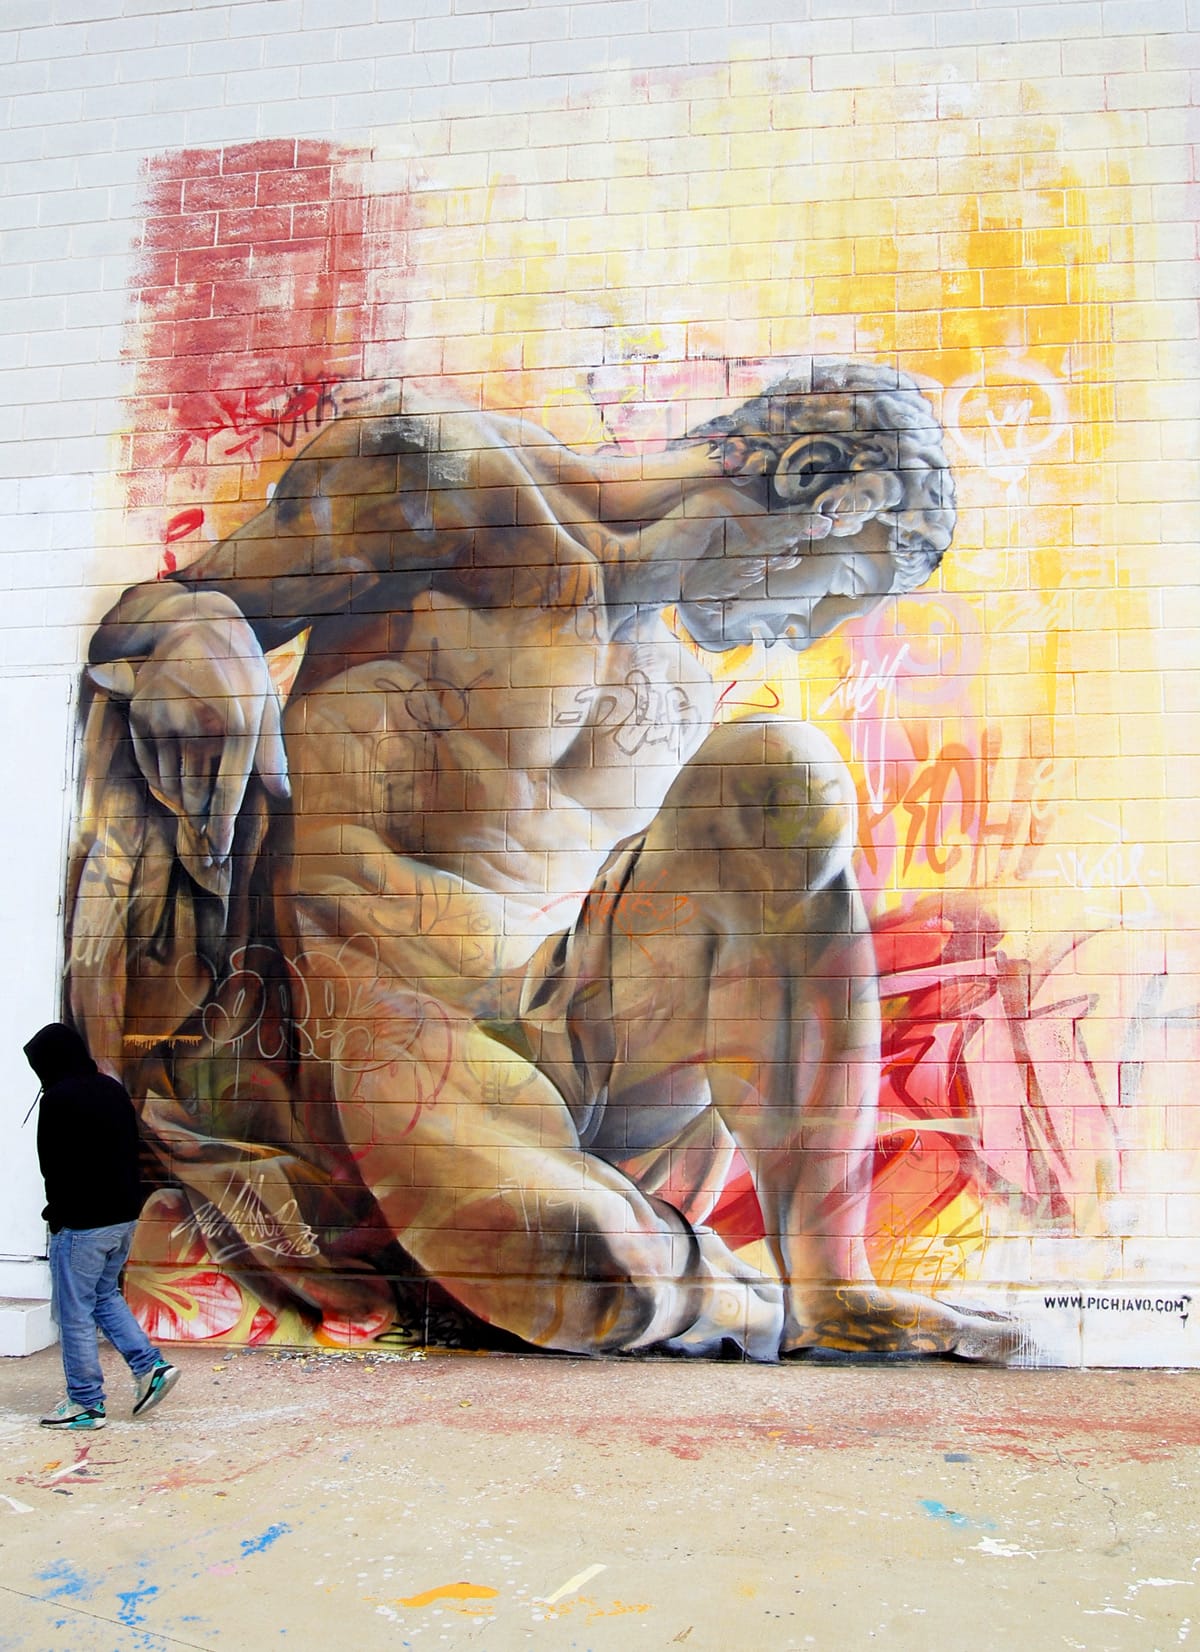 Impressive Monumental Murals That Blend Classical Figures And Graffiti By Pichiavo (1)